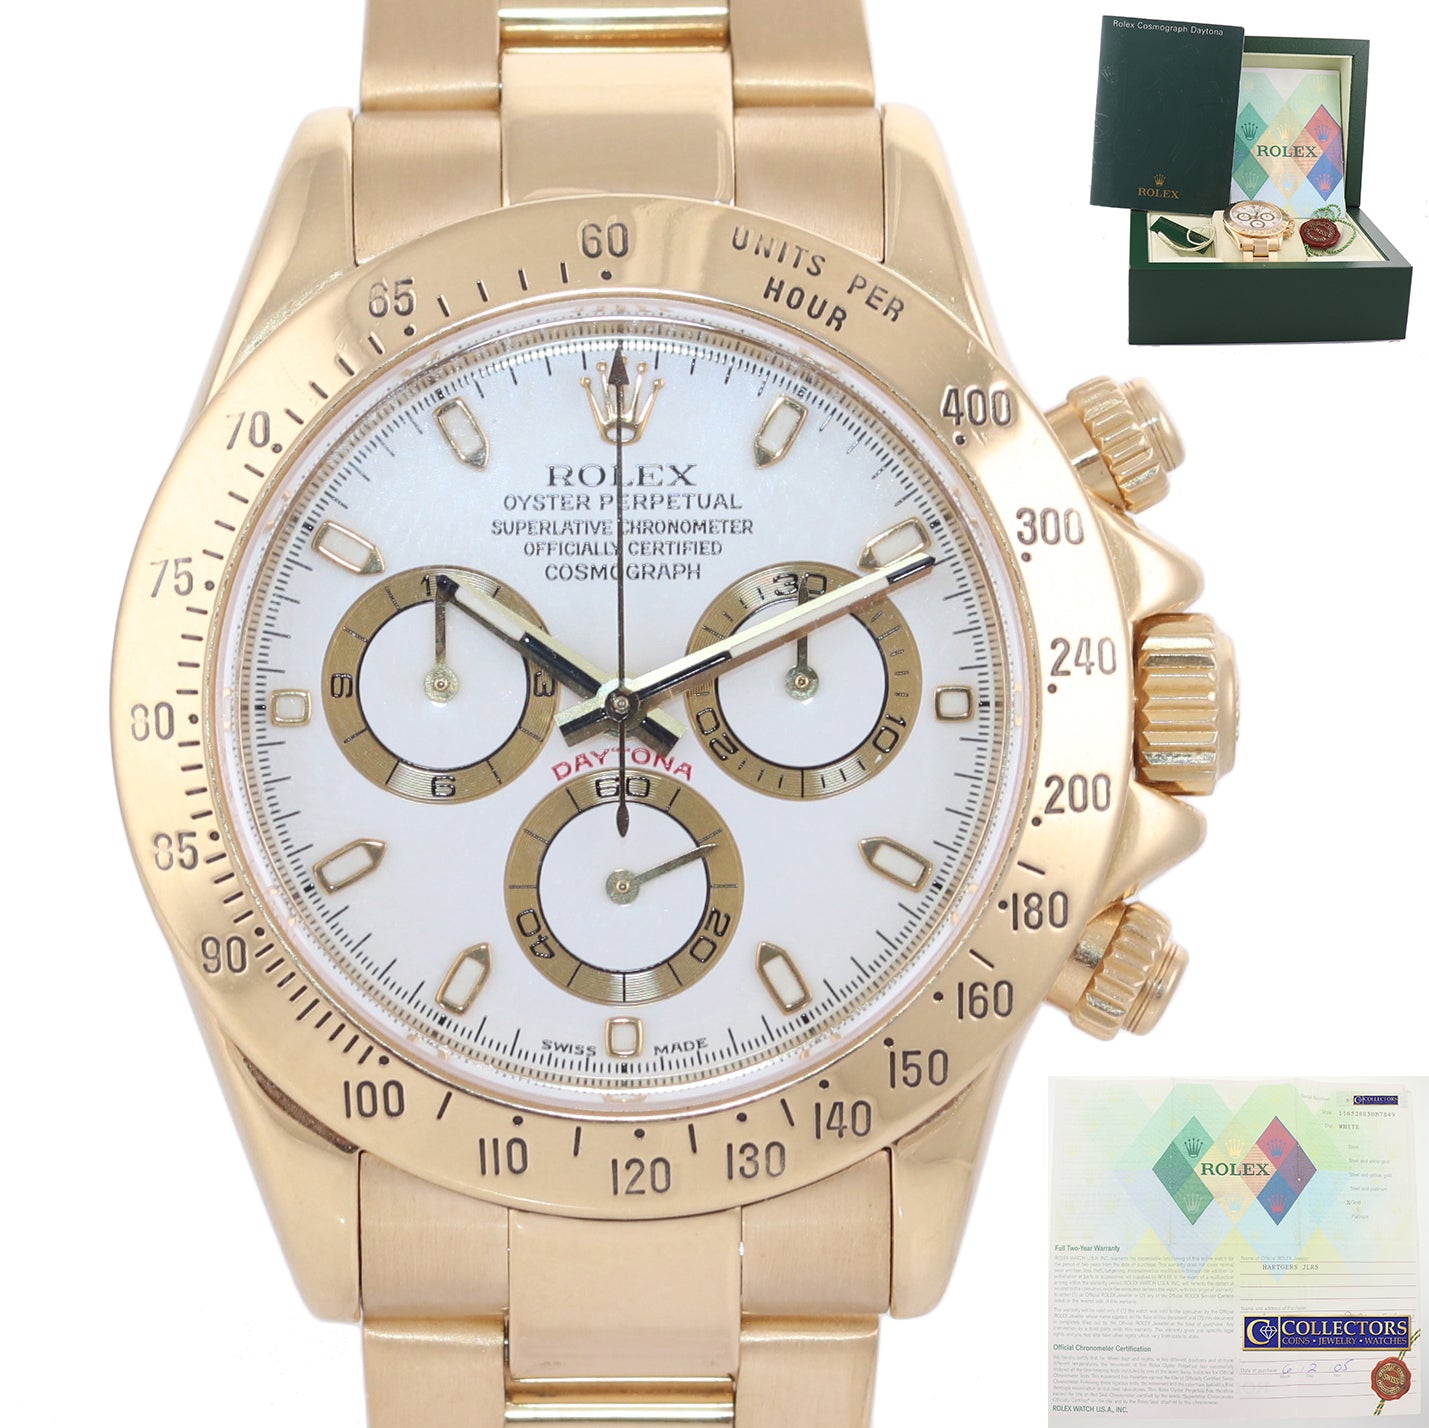 PAPERS Rolex Daytona Cosmo 116528 White Dial 18K Yellow Gold 40mm Watch Box